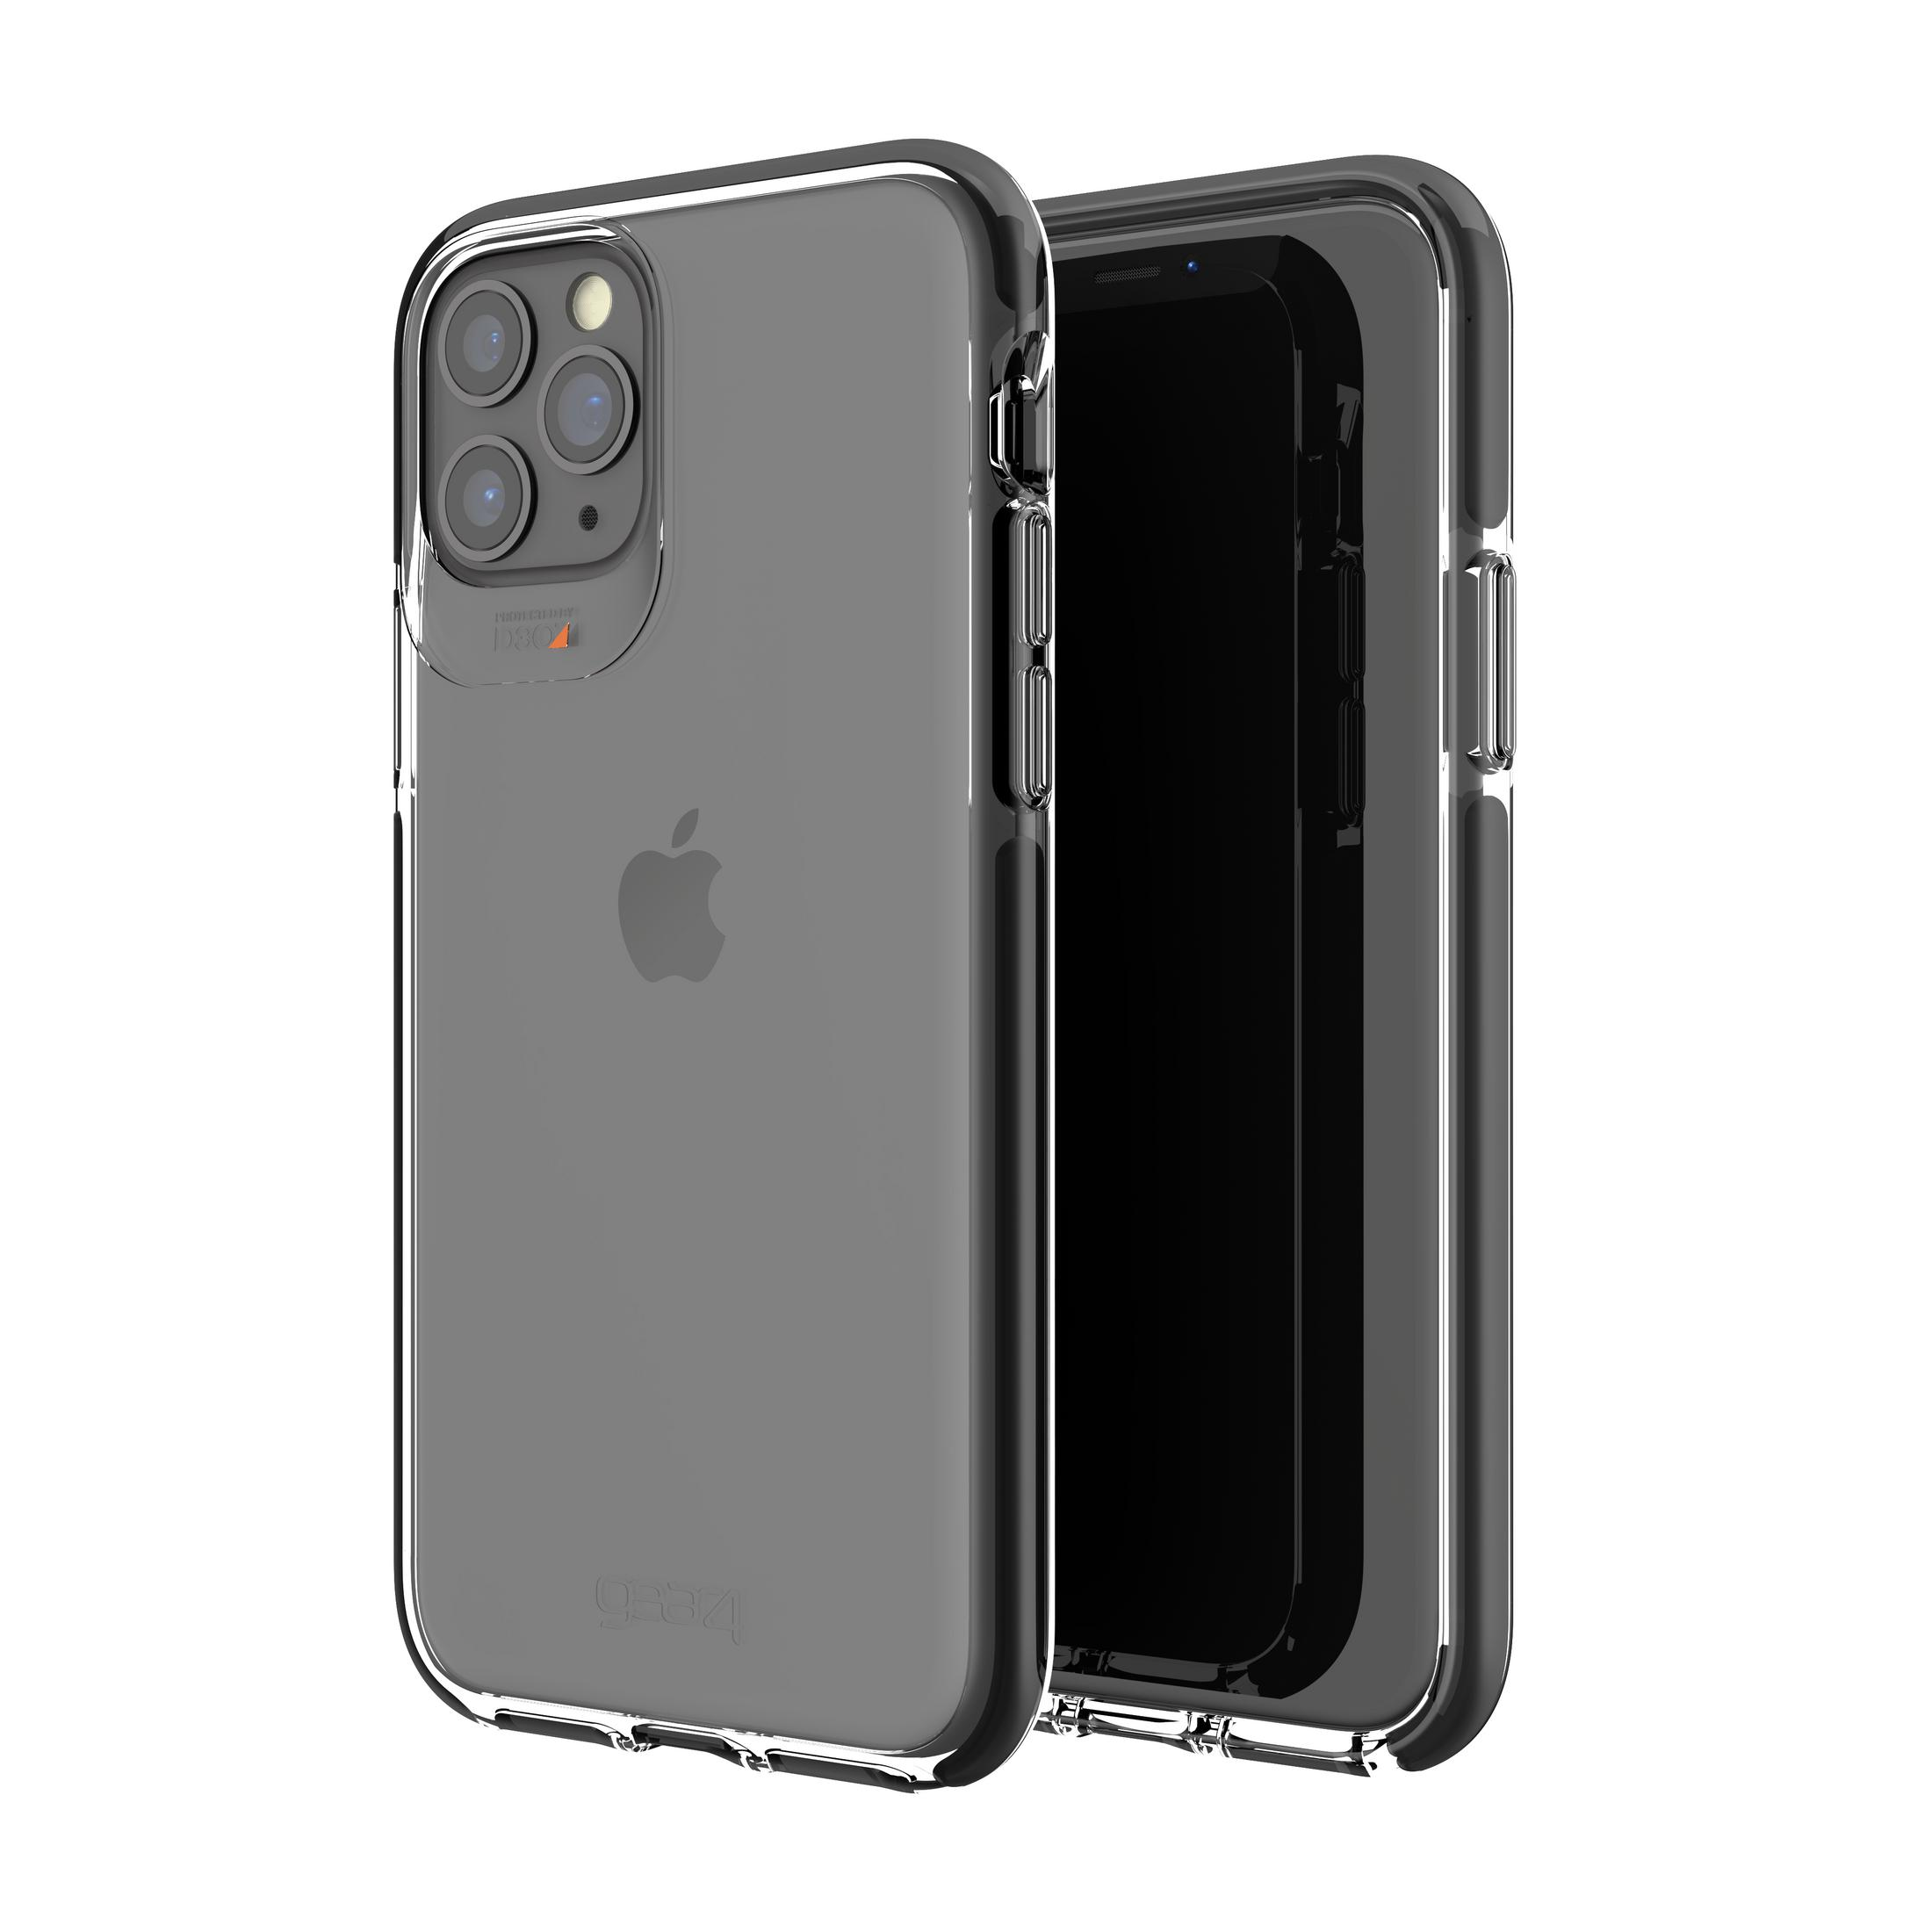 GEAR4 0S32919 PICCADILLY 11 (BLACK), IPHONE iPhone 11 Apple, PRO Pro, Backcover, Schwarz